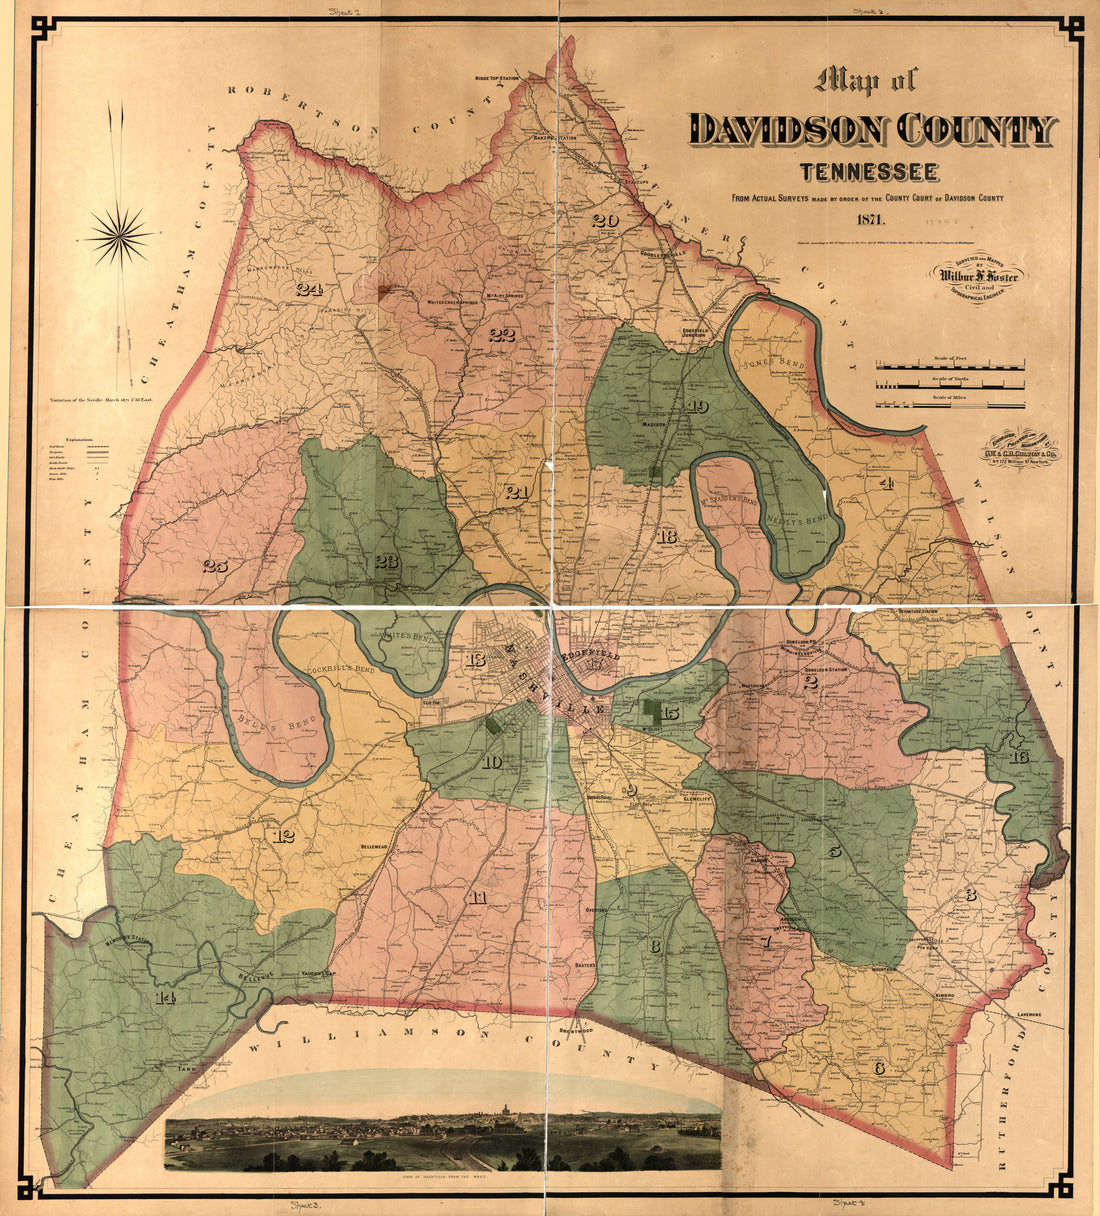 This old map of Map of Davidson County Tennessee, from Actual Surveys Made by Order of the County Court of Davidson County, from 1871 was created by Wilbur F. Foster,  G.W. &amp; C.B. Colton &amp; Co in 1871